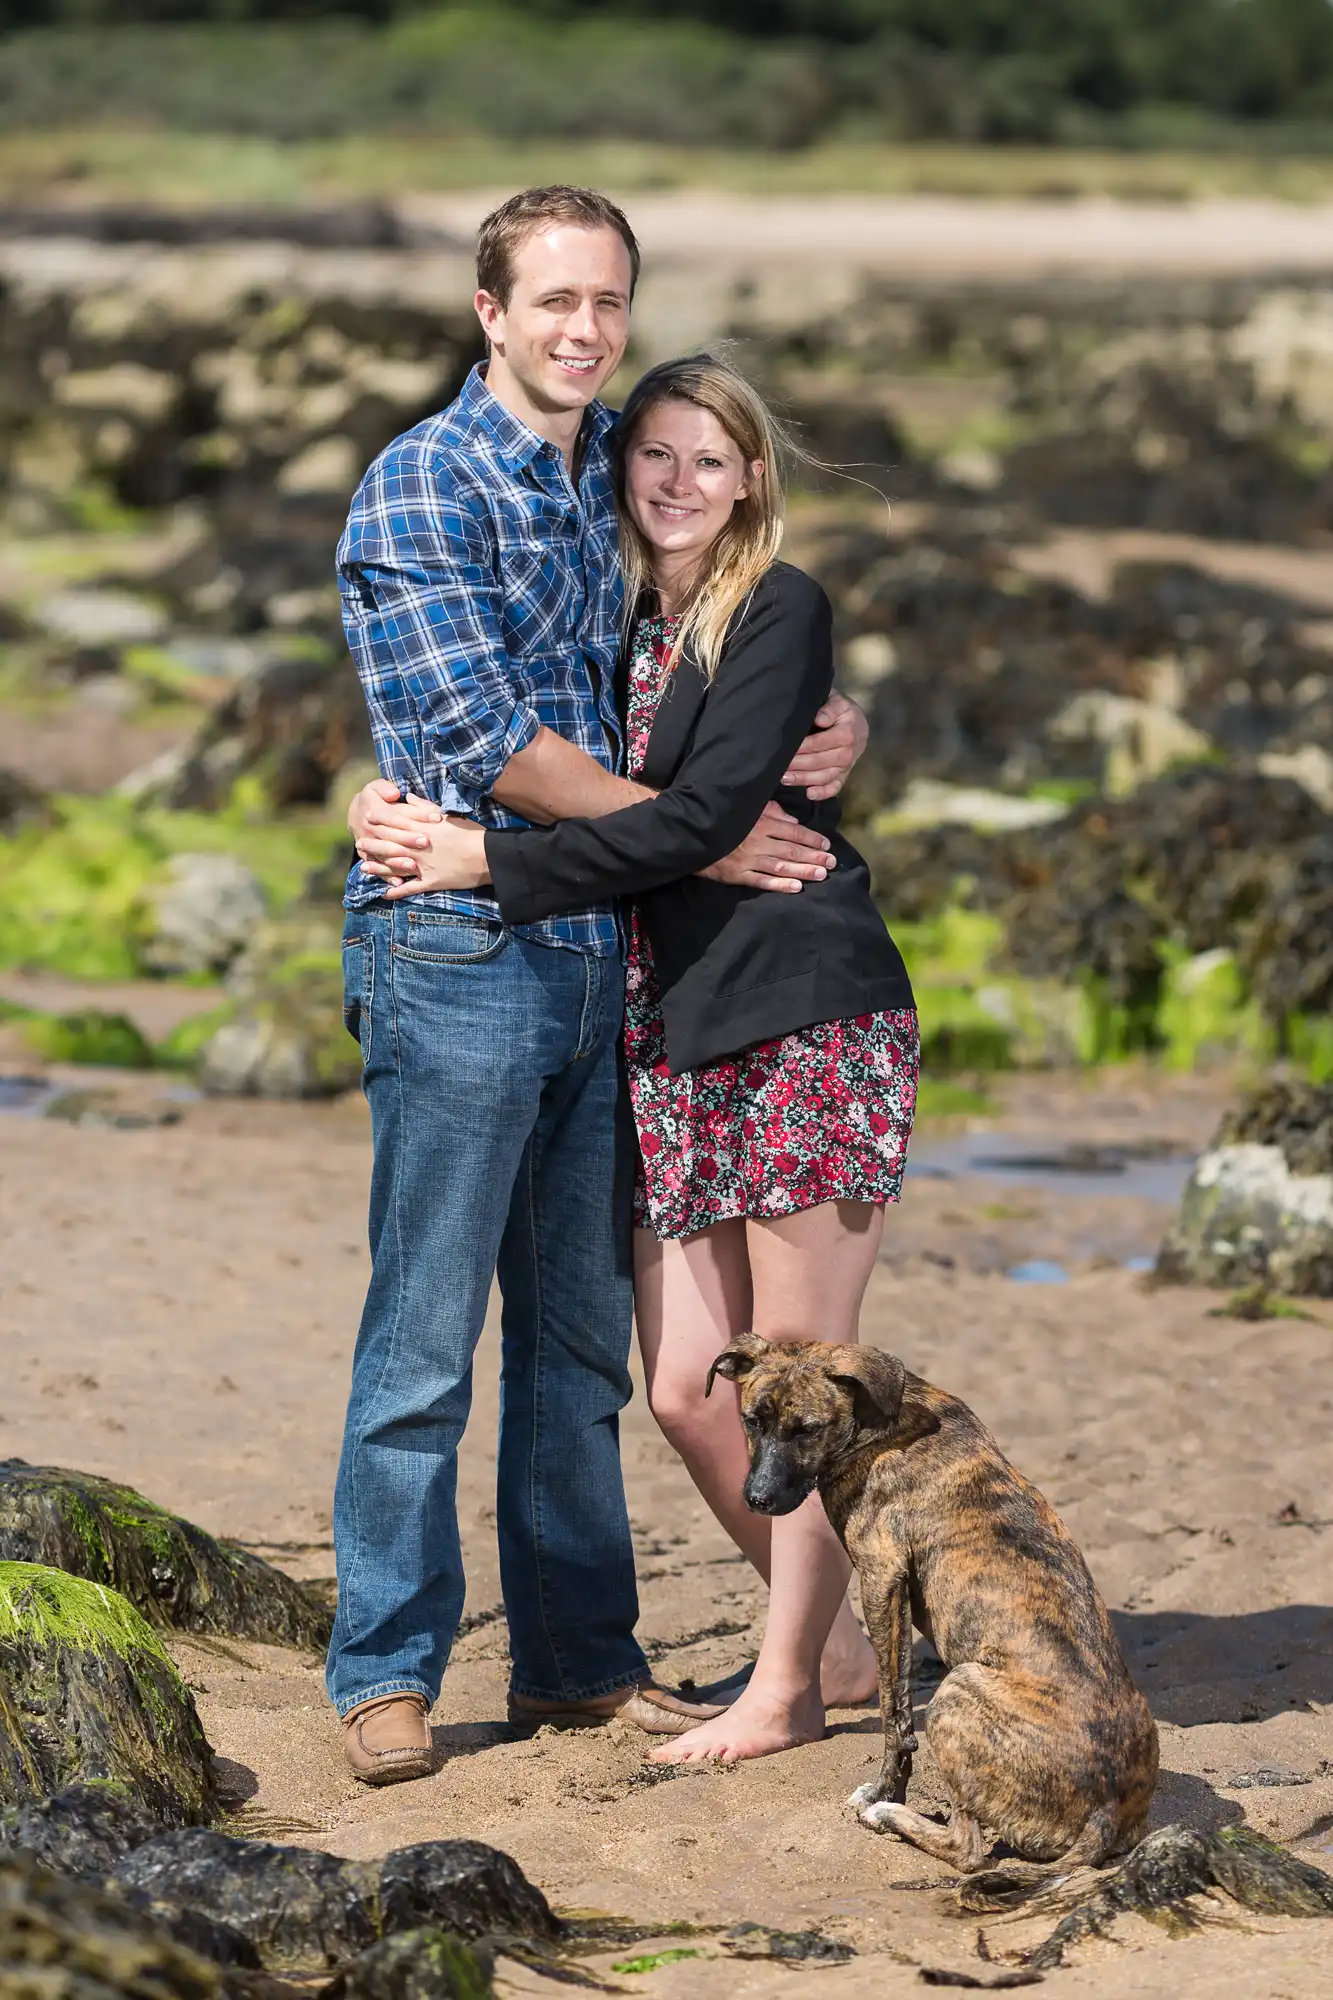 A couple embracing on a sandy beach with a brown dog sitting beside them, rocks and greenery in the background.